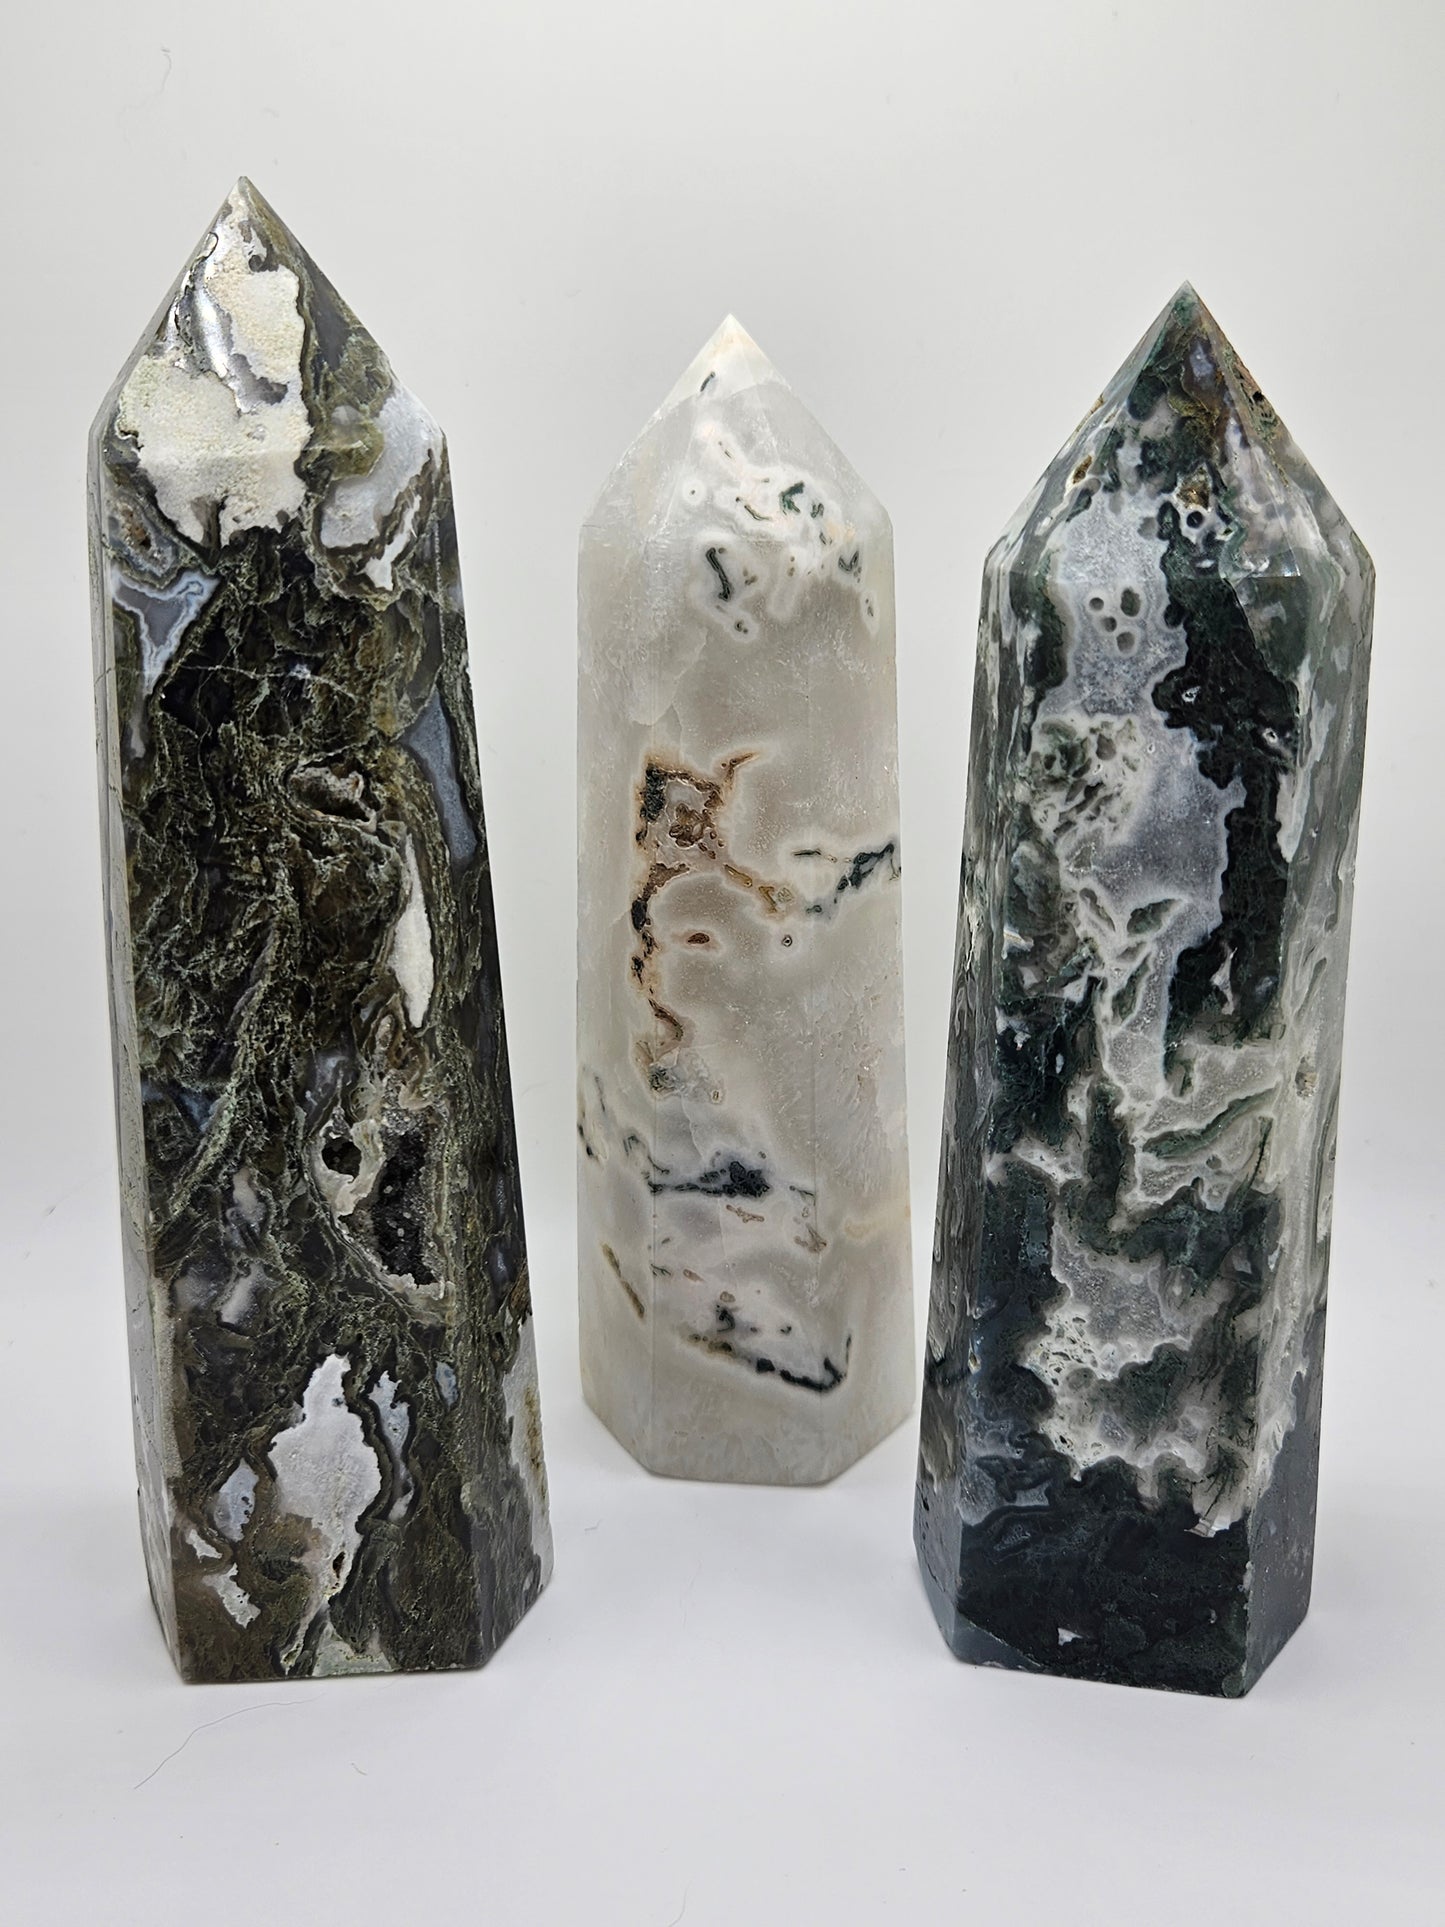 Statement Moss Agate Tower